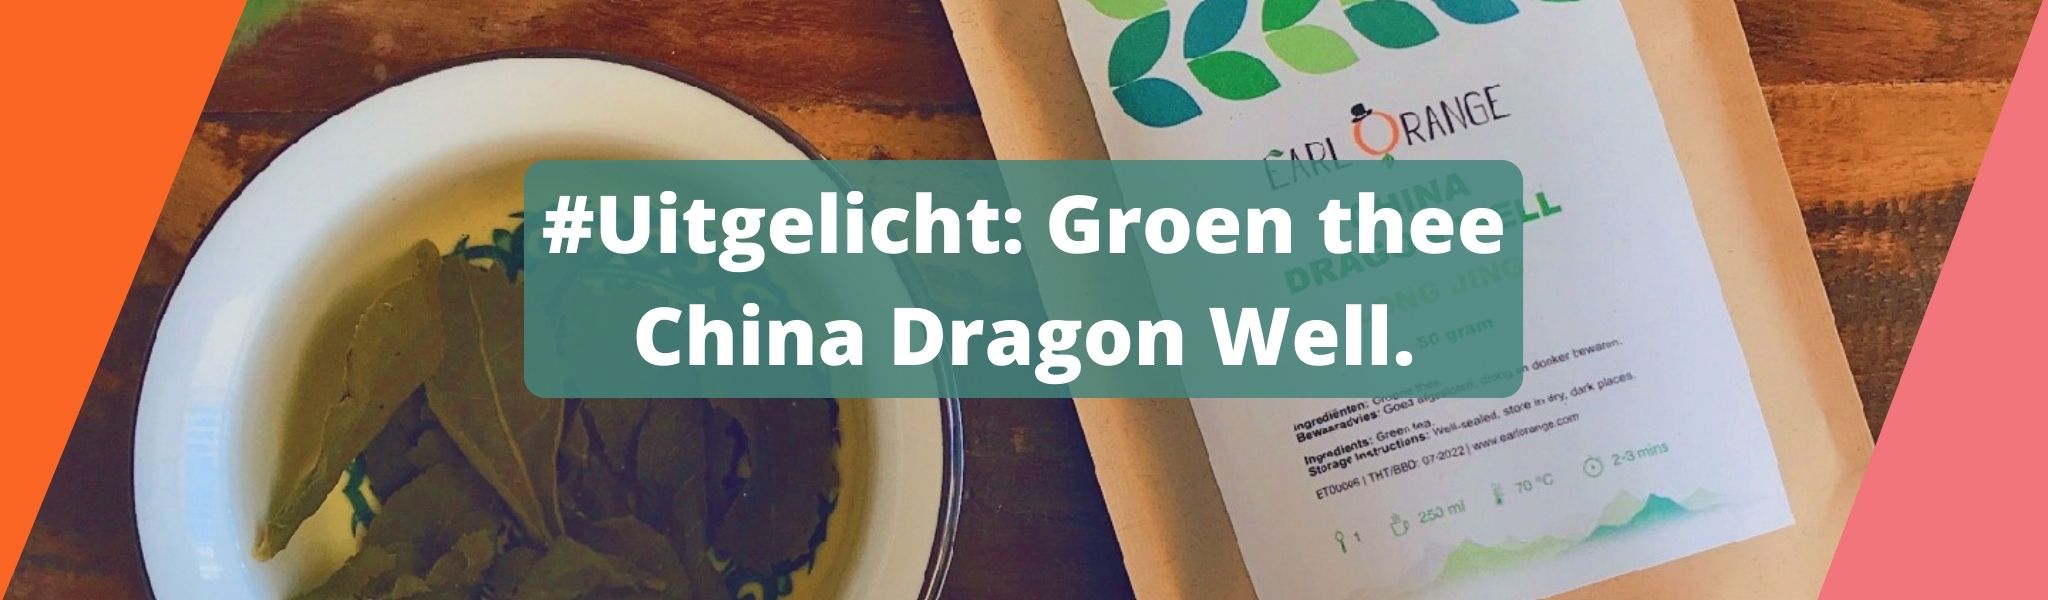 Lees hier alles over China Dragon Well thee